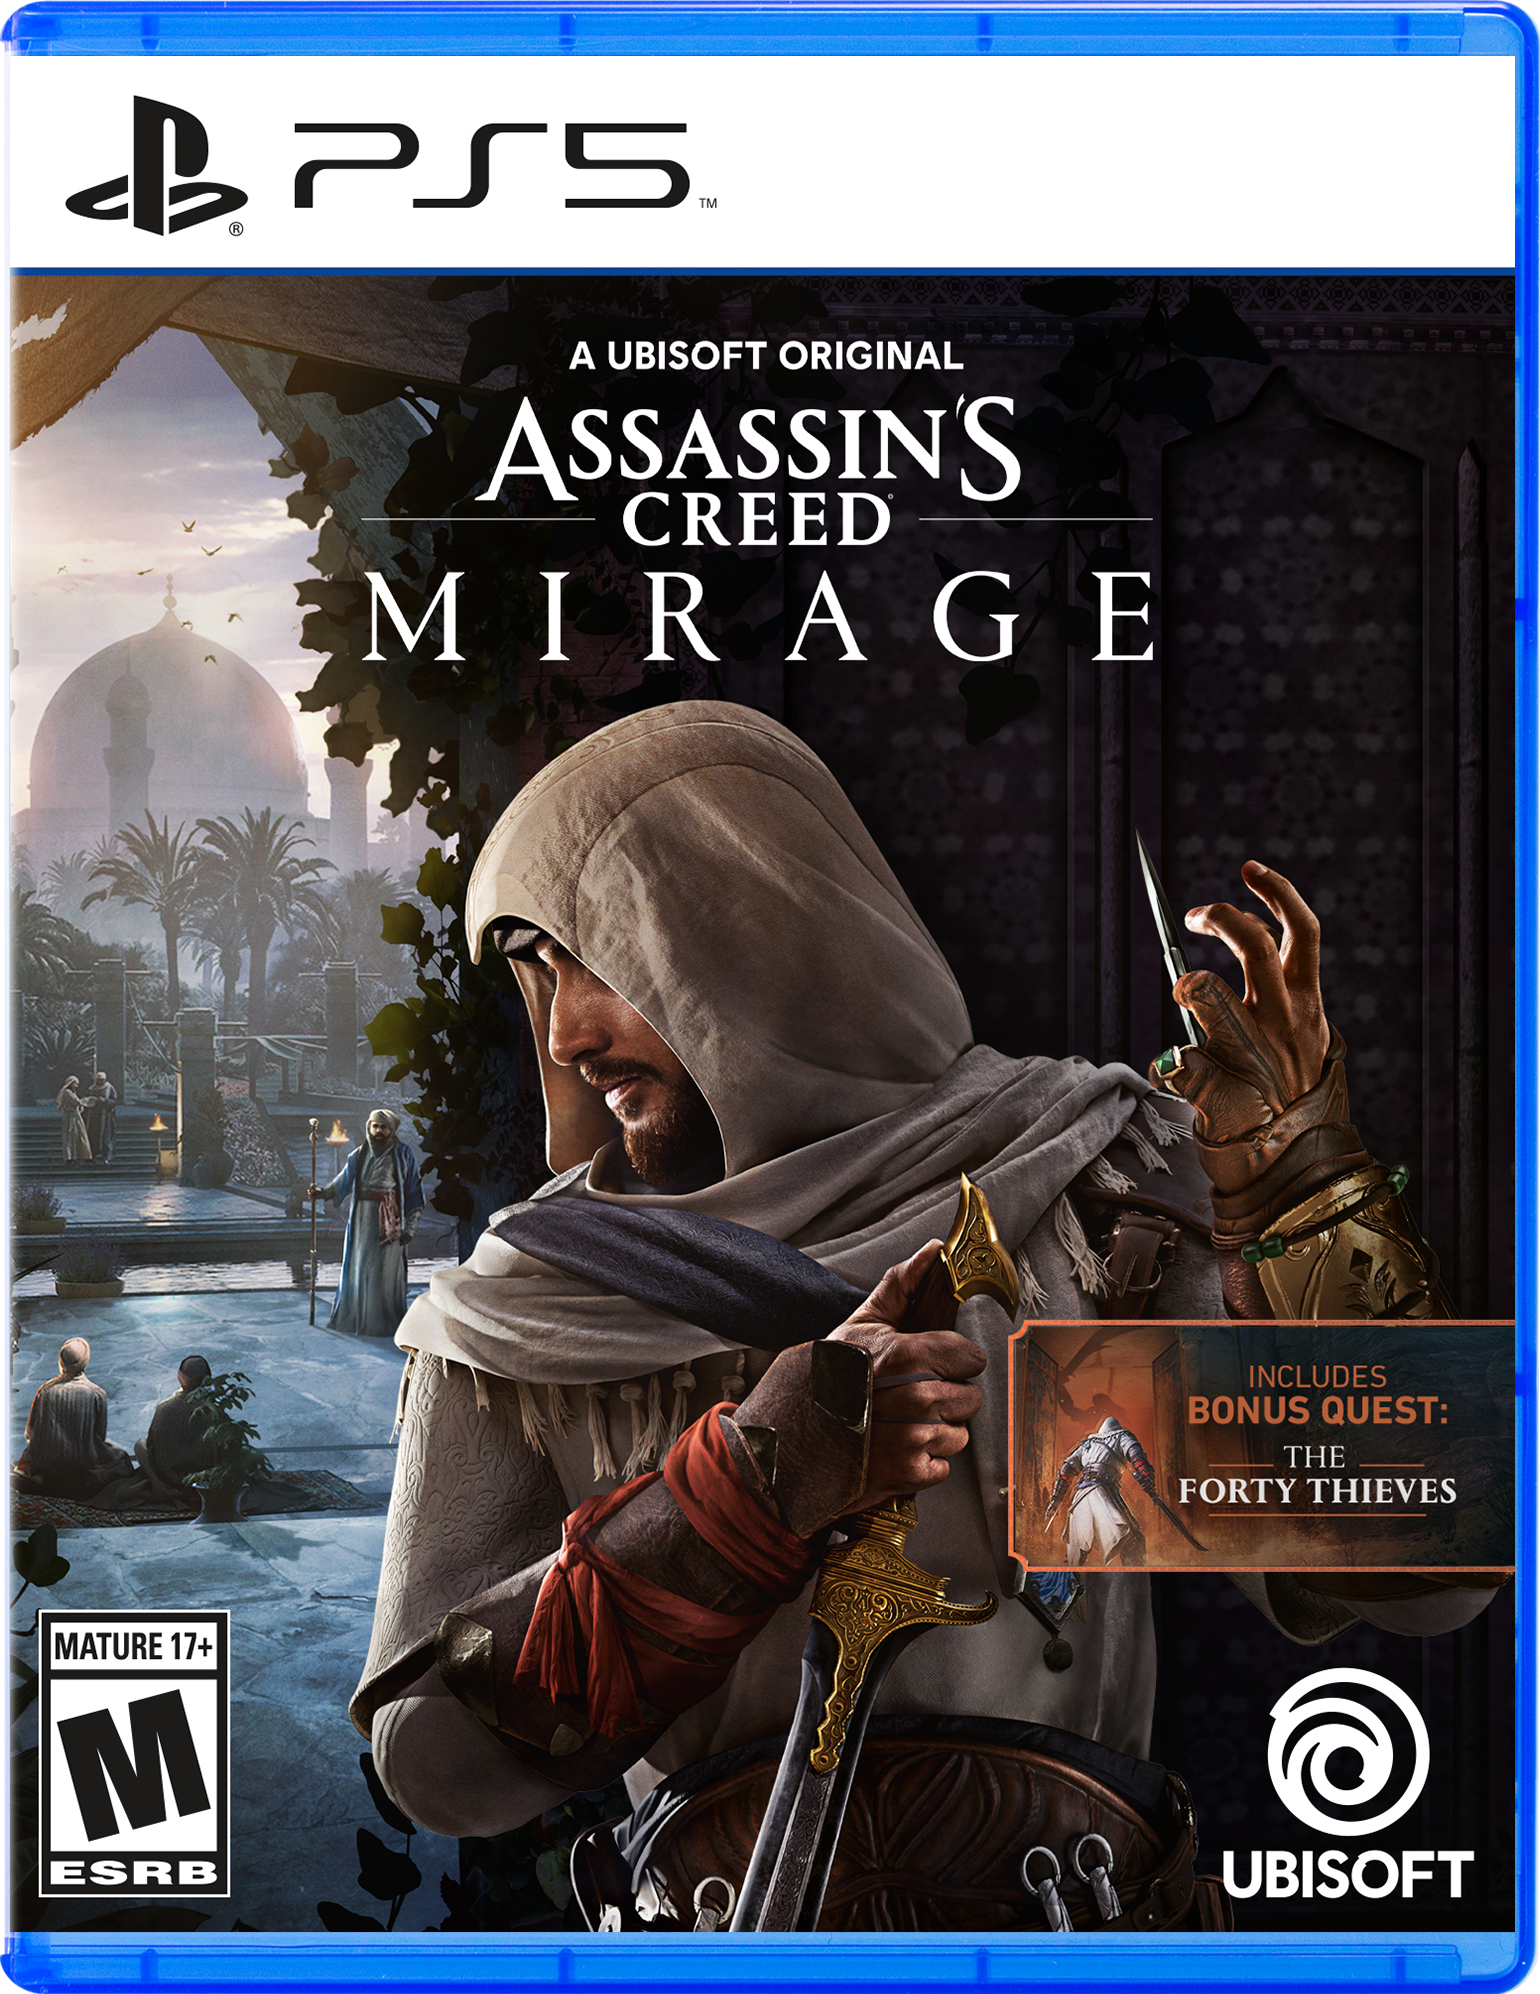 Assassin's Creed Video Games in Assassin's Creed 